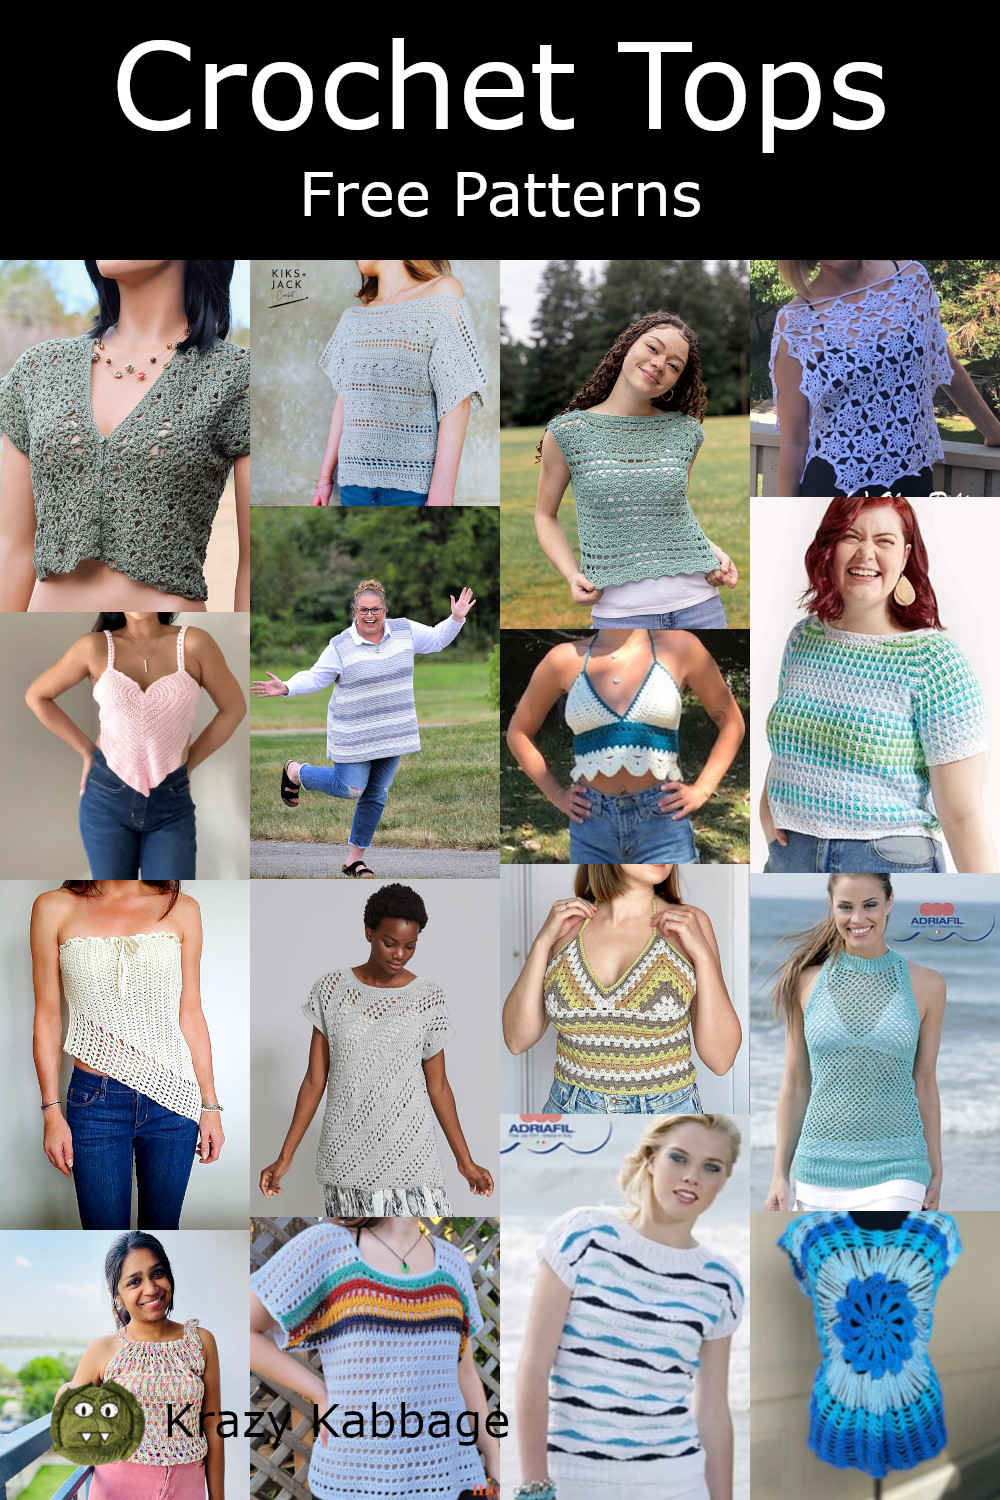 Summer Tops Free Crochet Patterns Collection – Krazy Kabbage